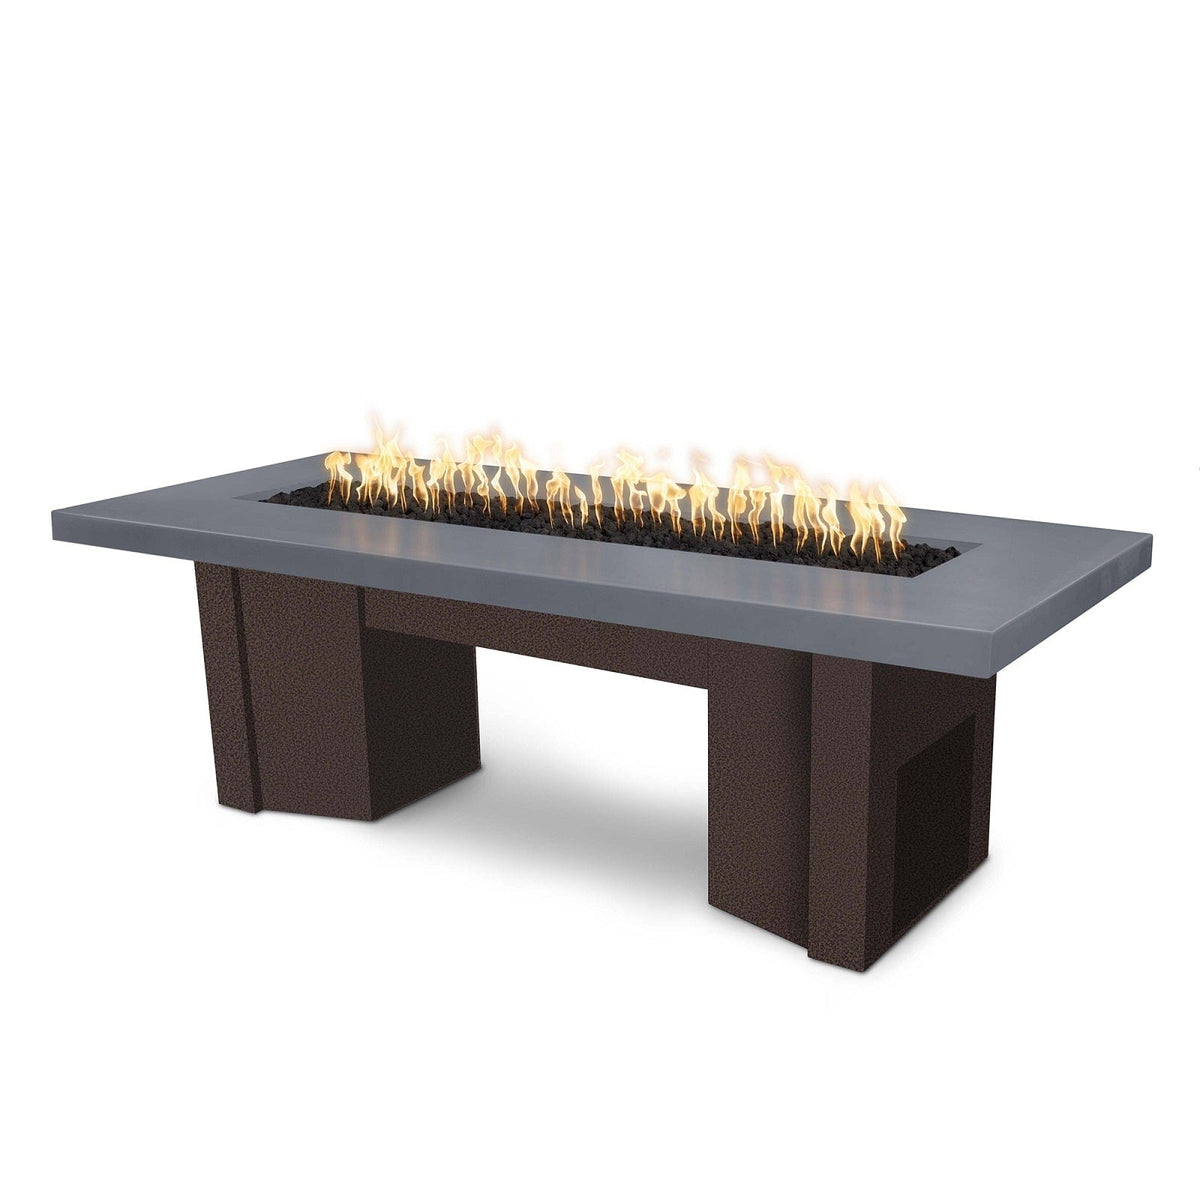 The Outdoor Plus Fire Features Gray (-GRY) / Copper Vein Powder Coated Steel (-CPV) The Outdoor Plus 60&quot; Alameda Fire Table Smooth Concrete in Liquid Propane - 110V Plug &amp; Play Electronic Ignition / OPT-ALMGFRC60EKIT-LP